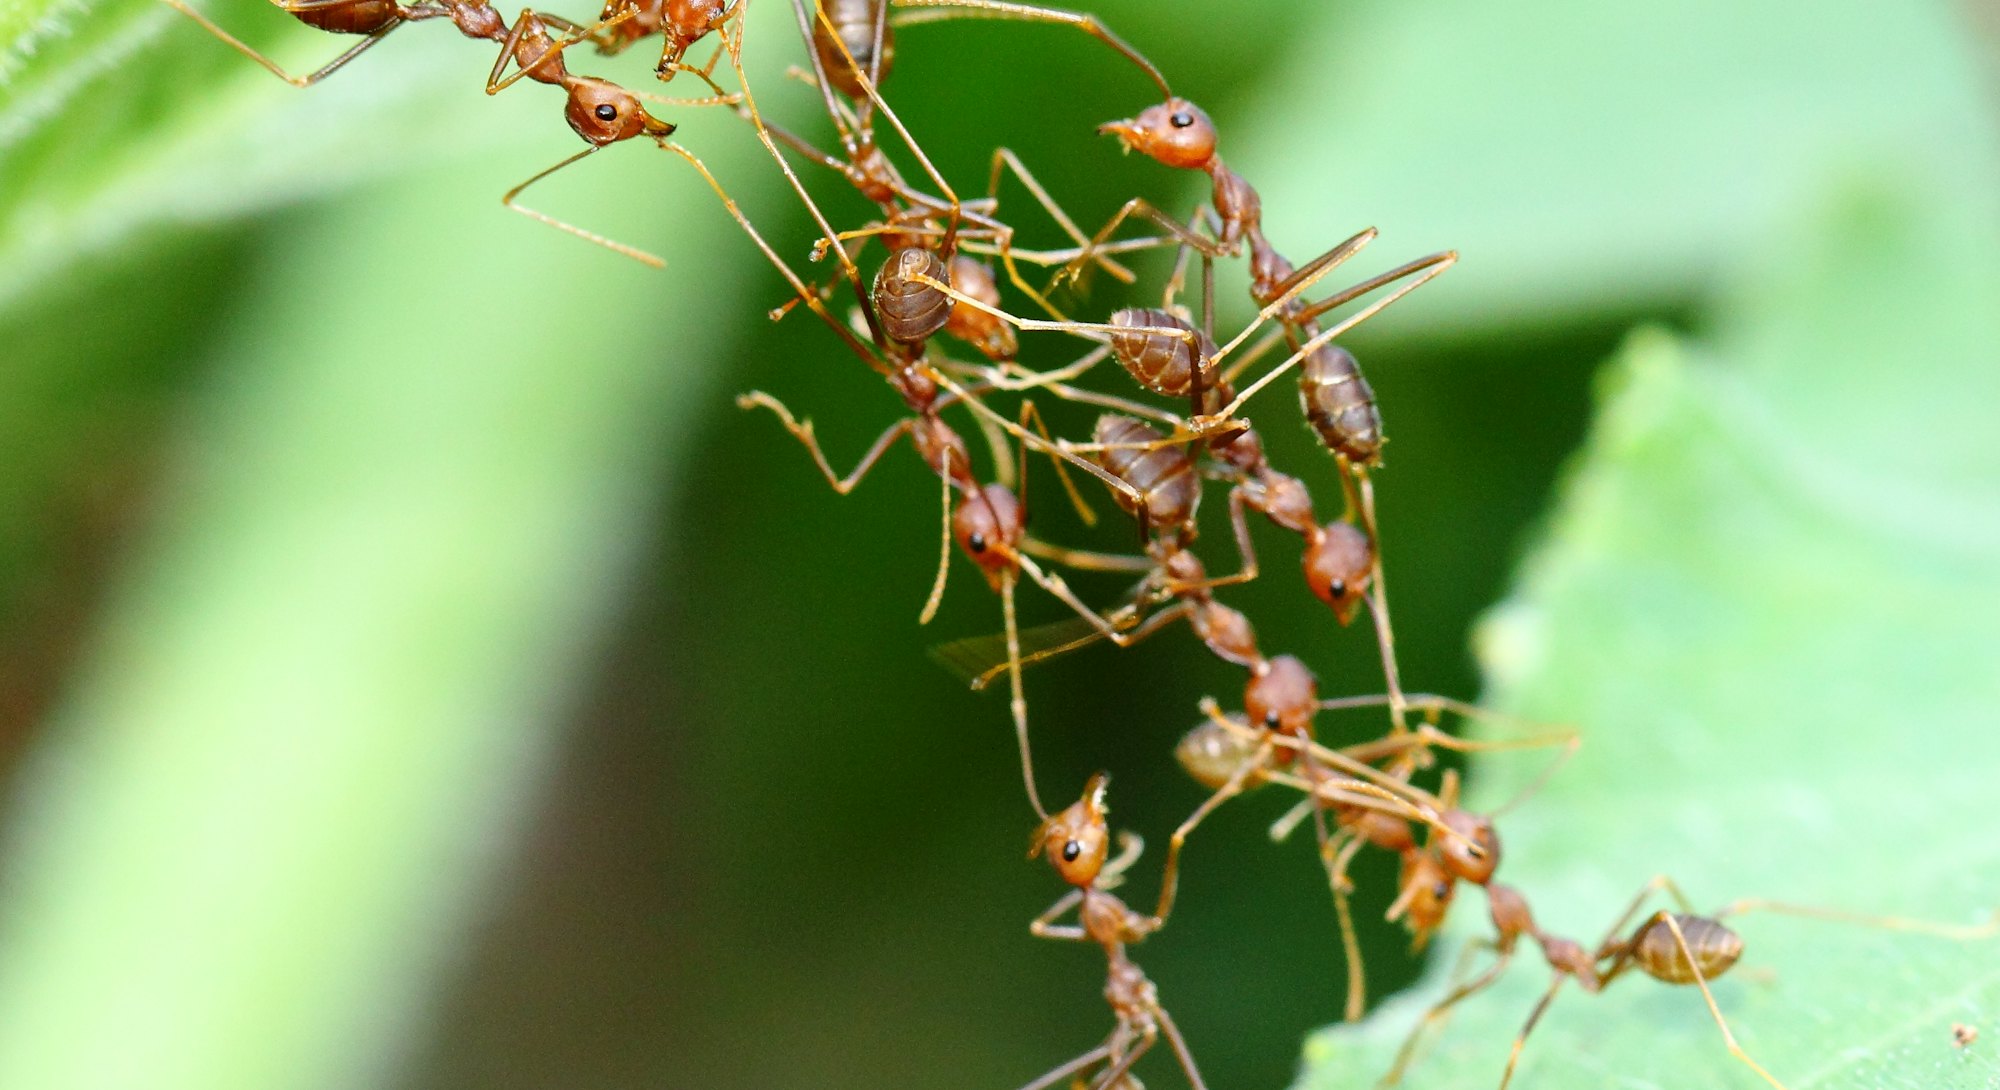 Group of weaver ants working together to cross over to other leaf.